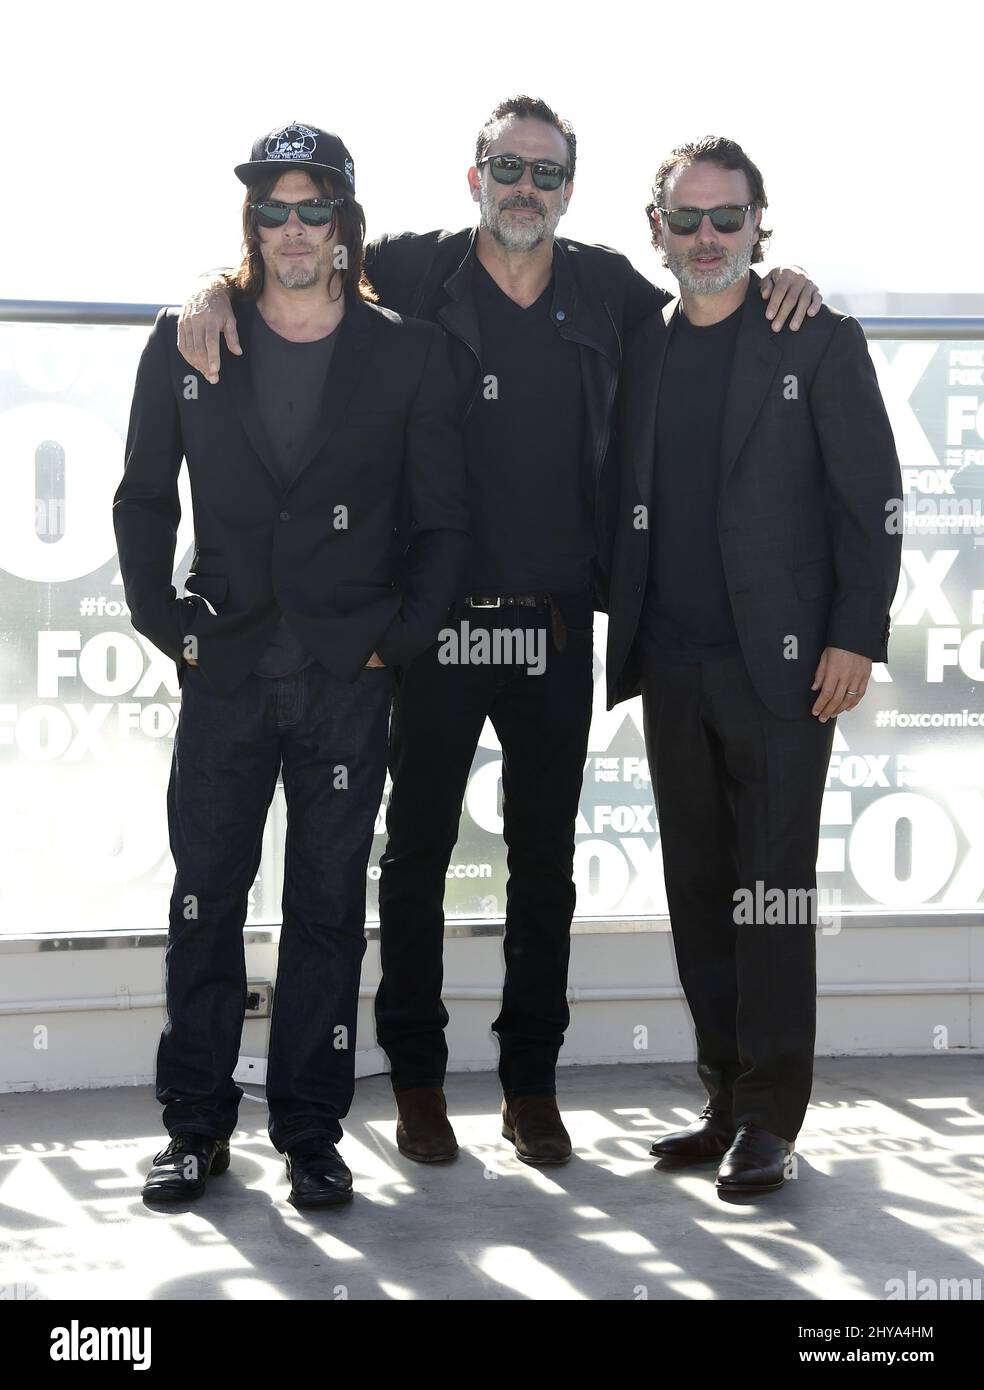 norman reedus andrew lincoln photo shoot